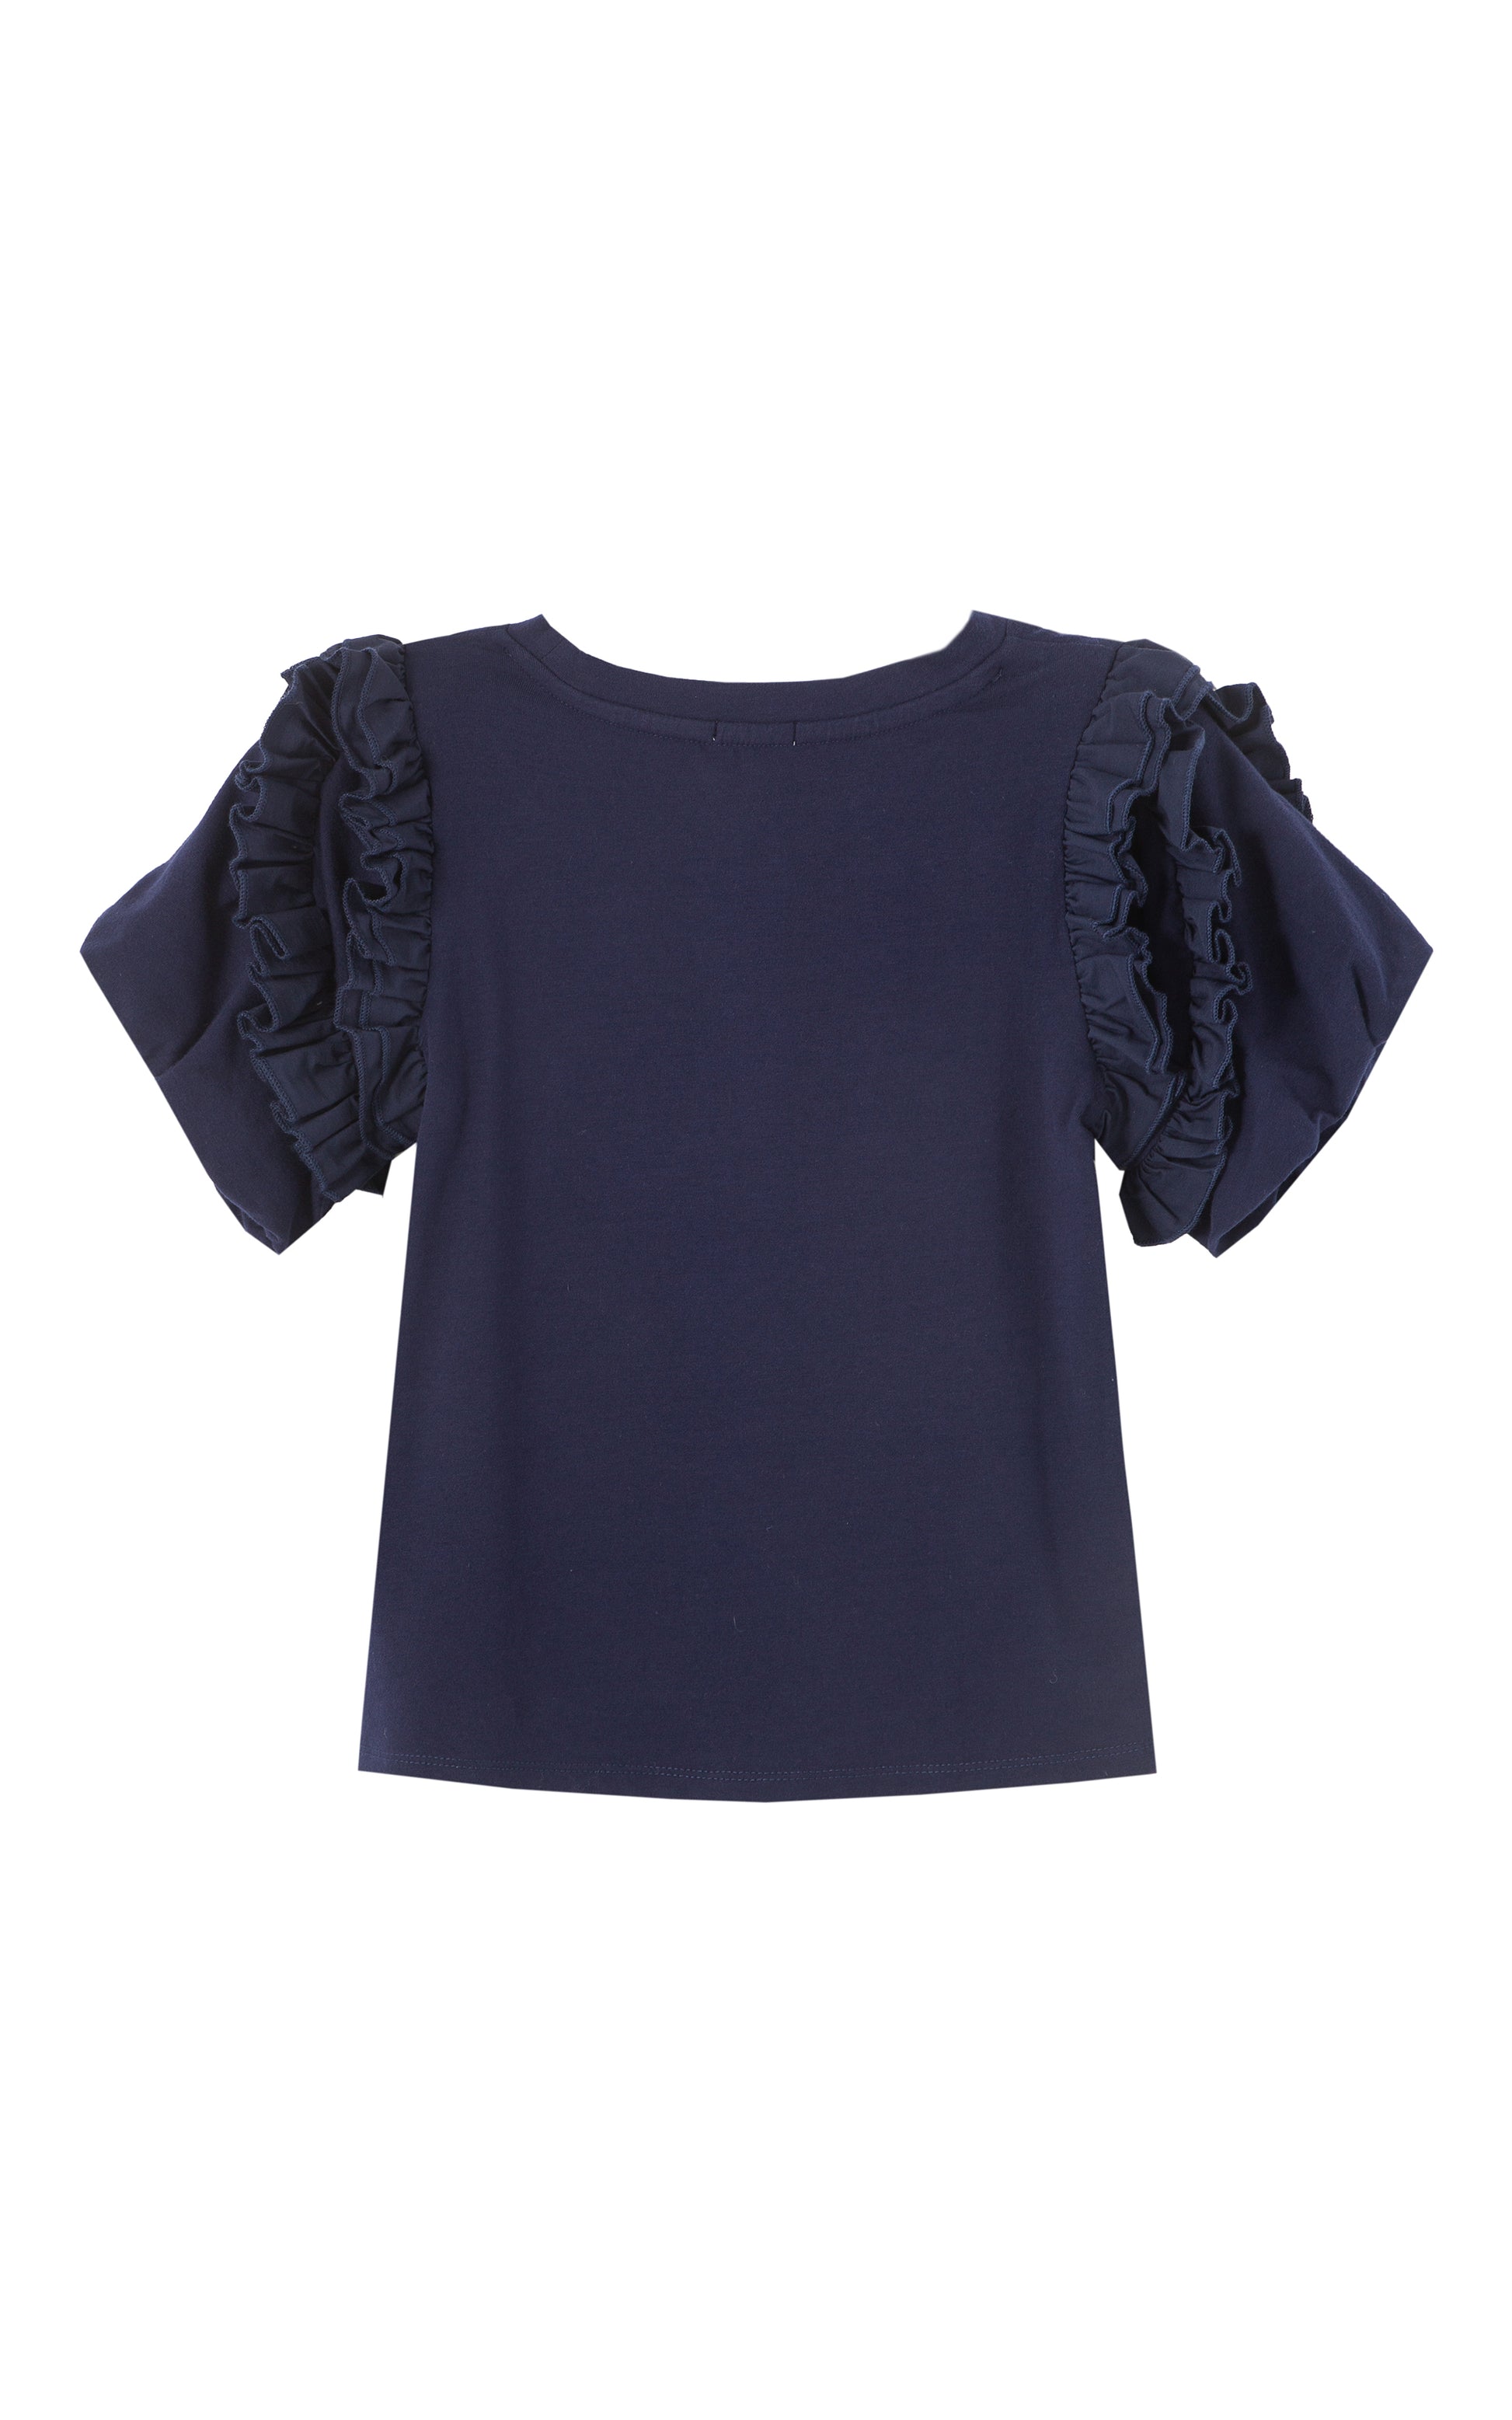 BACK OF DARK BLUE T-SHIRT WITH PLEATED RUFFLED SLEEVES